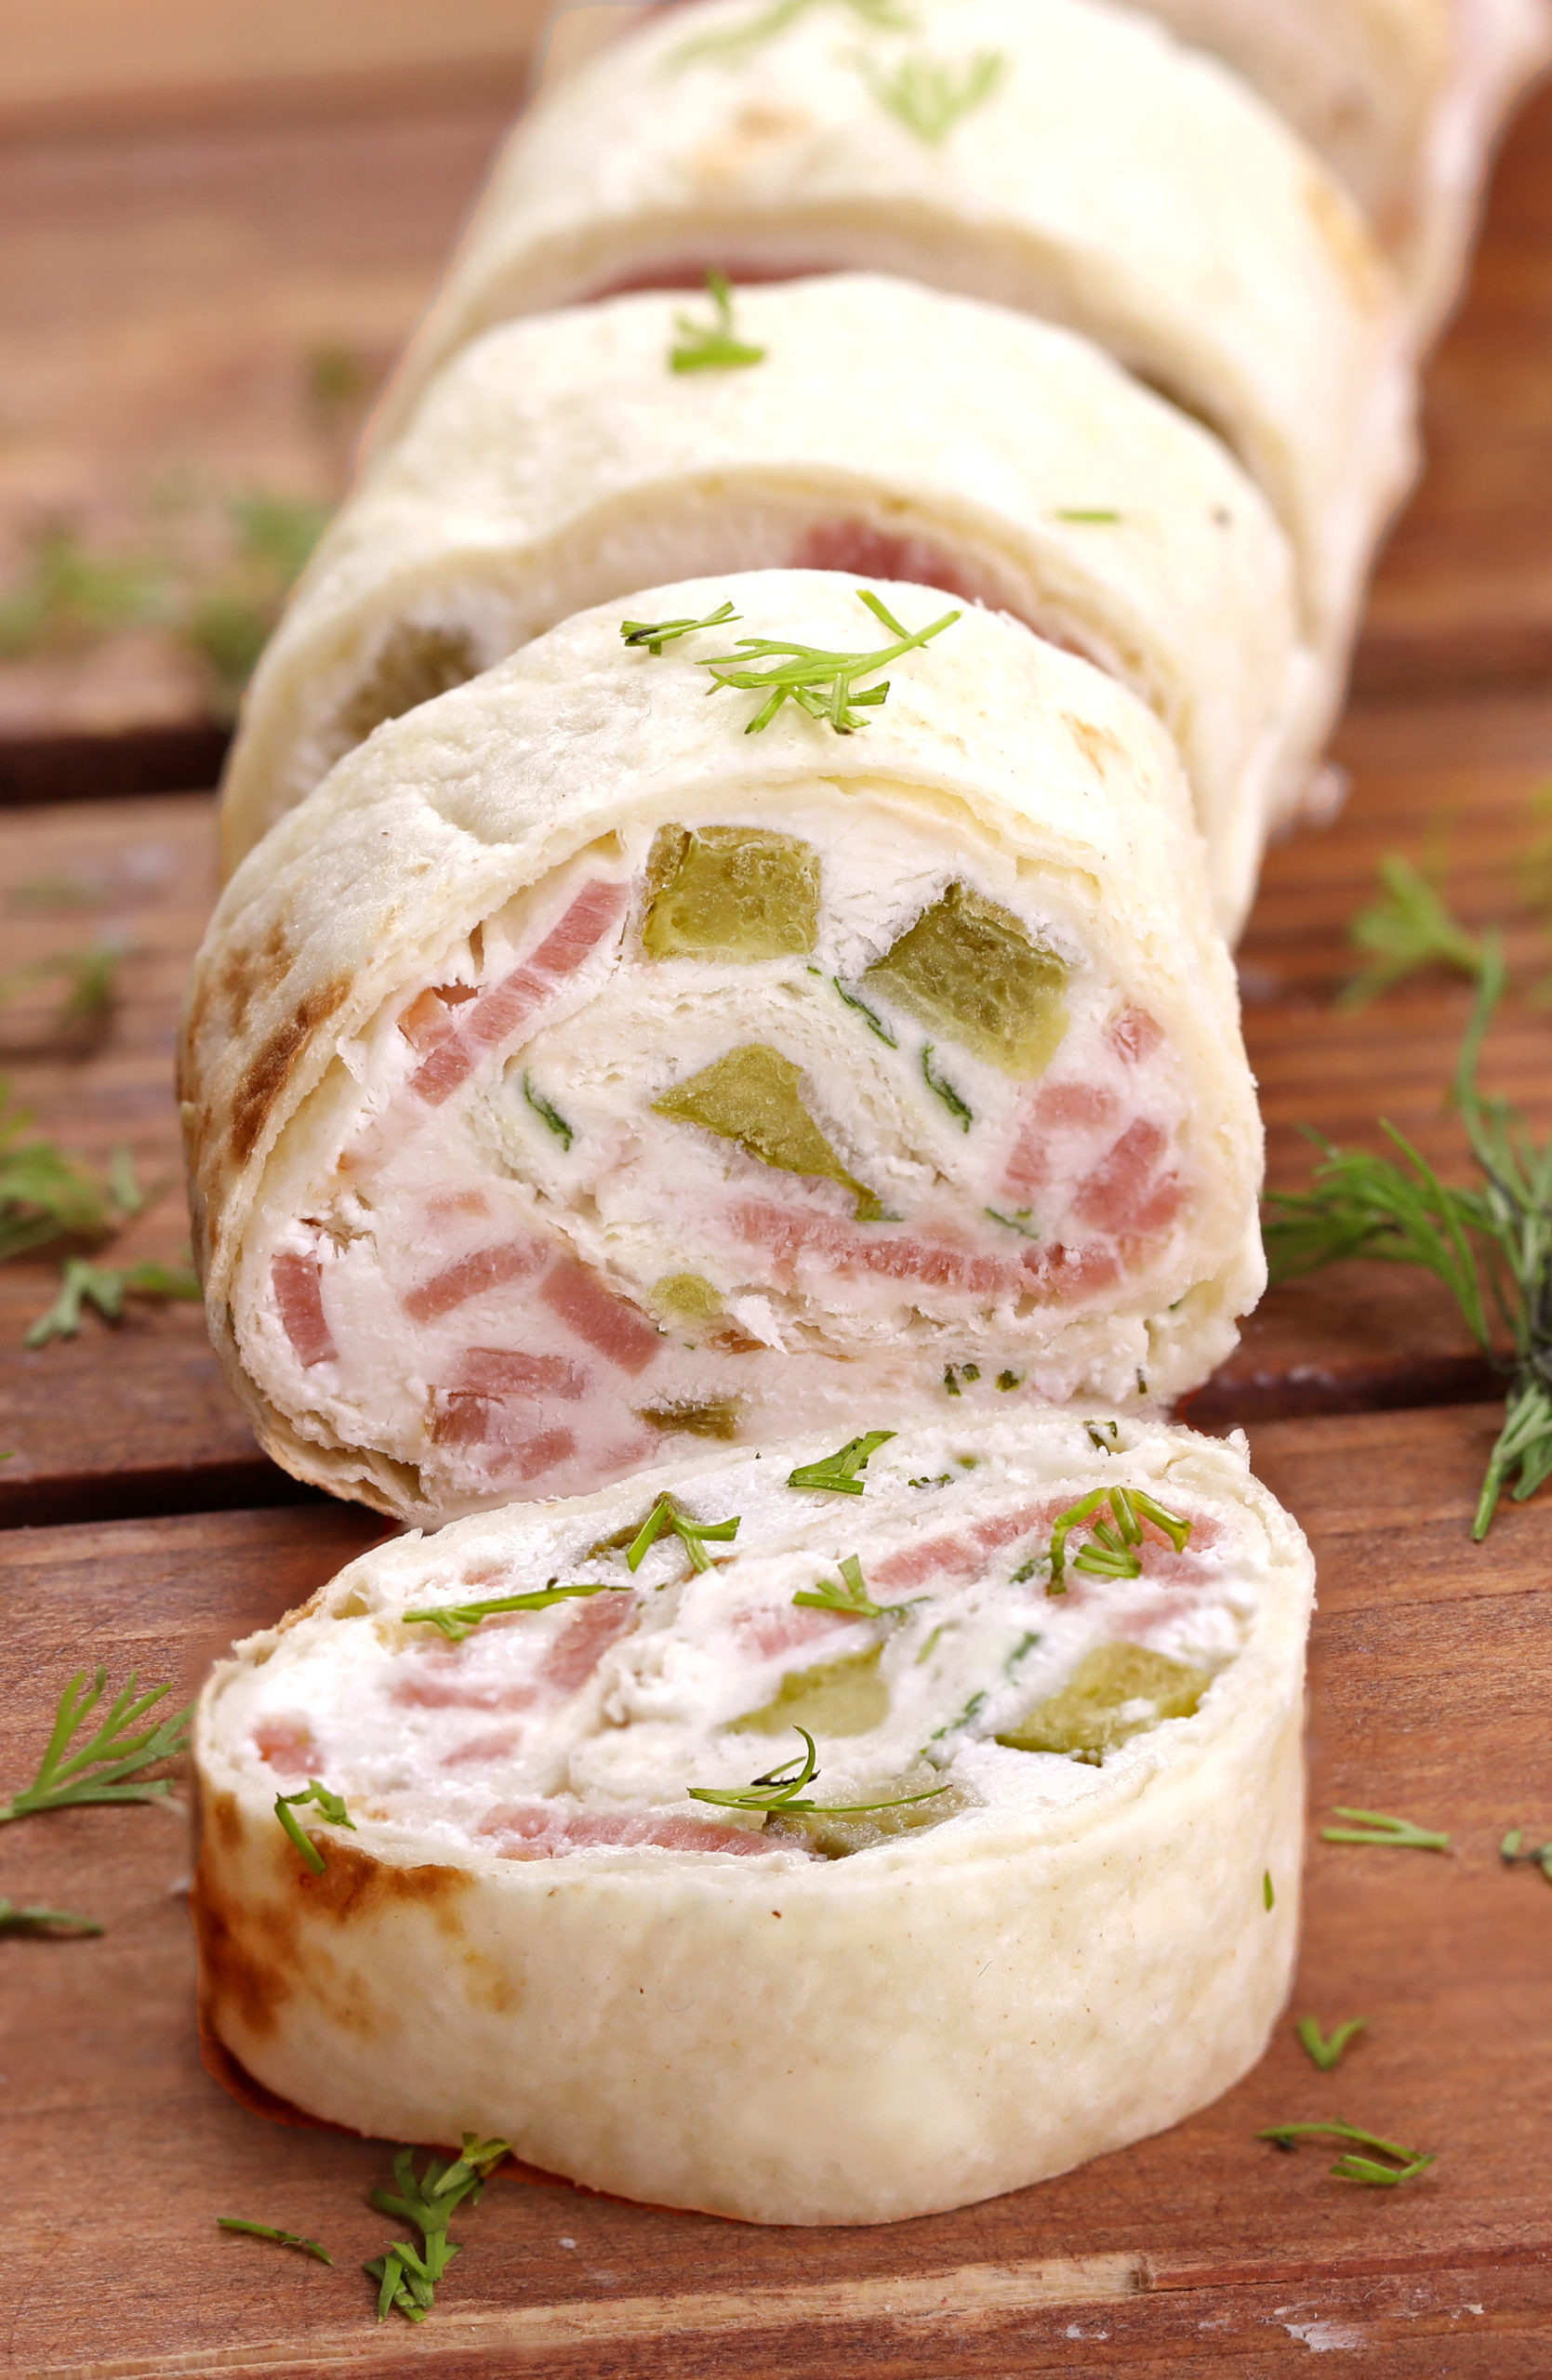 Creamy, crunchy, and full of flavor these Dill Pickle Roll-Ups are a must for Christmas appetizers or game day snacking.